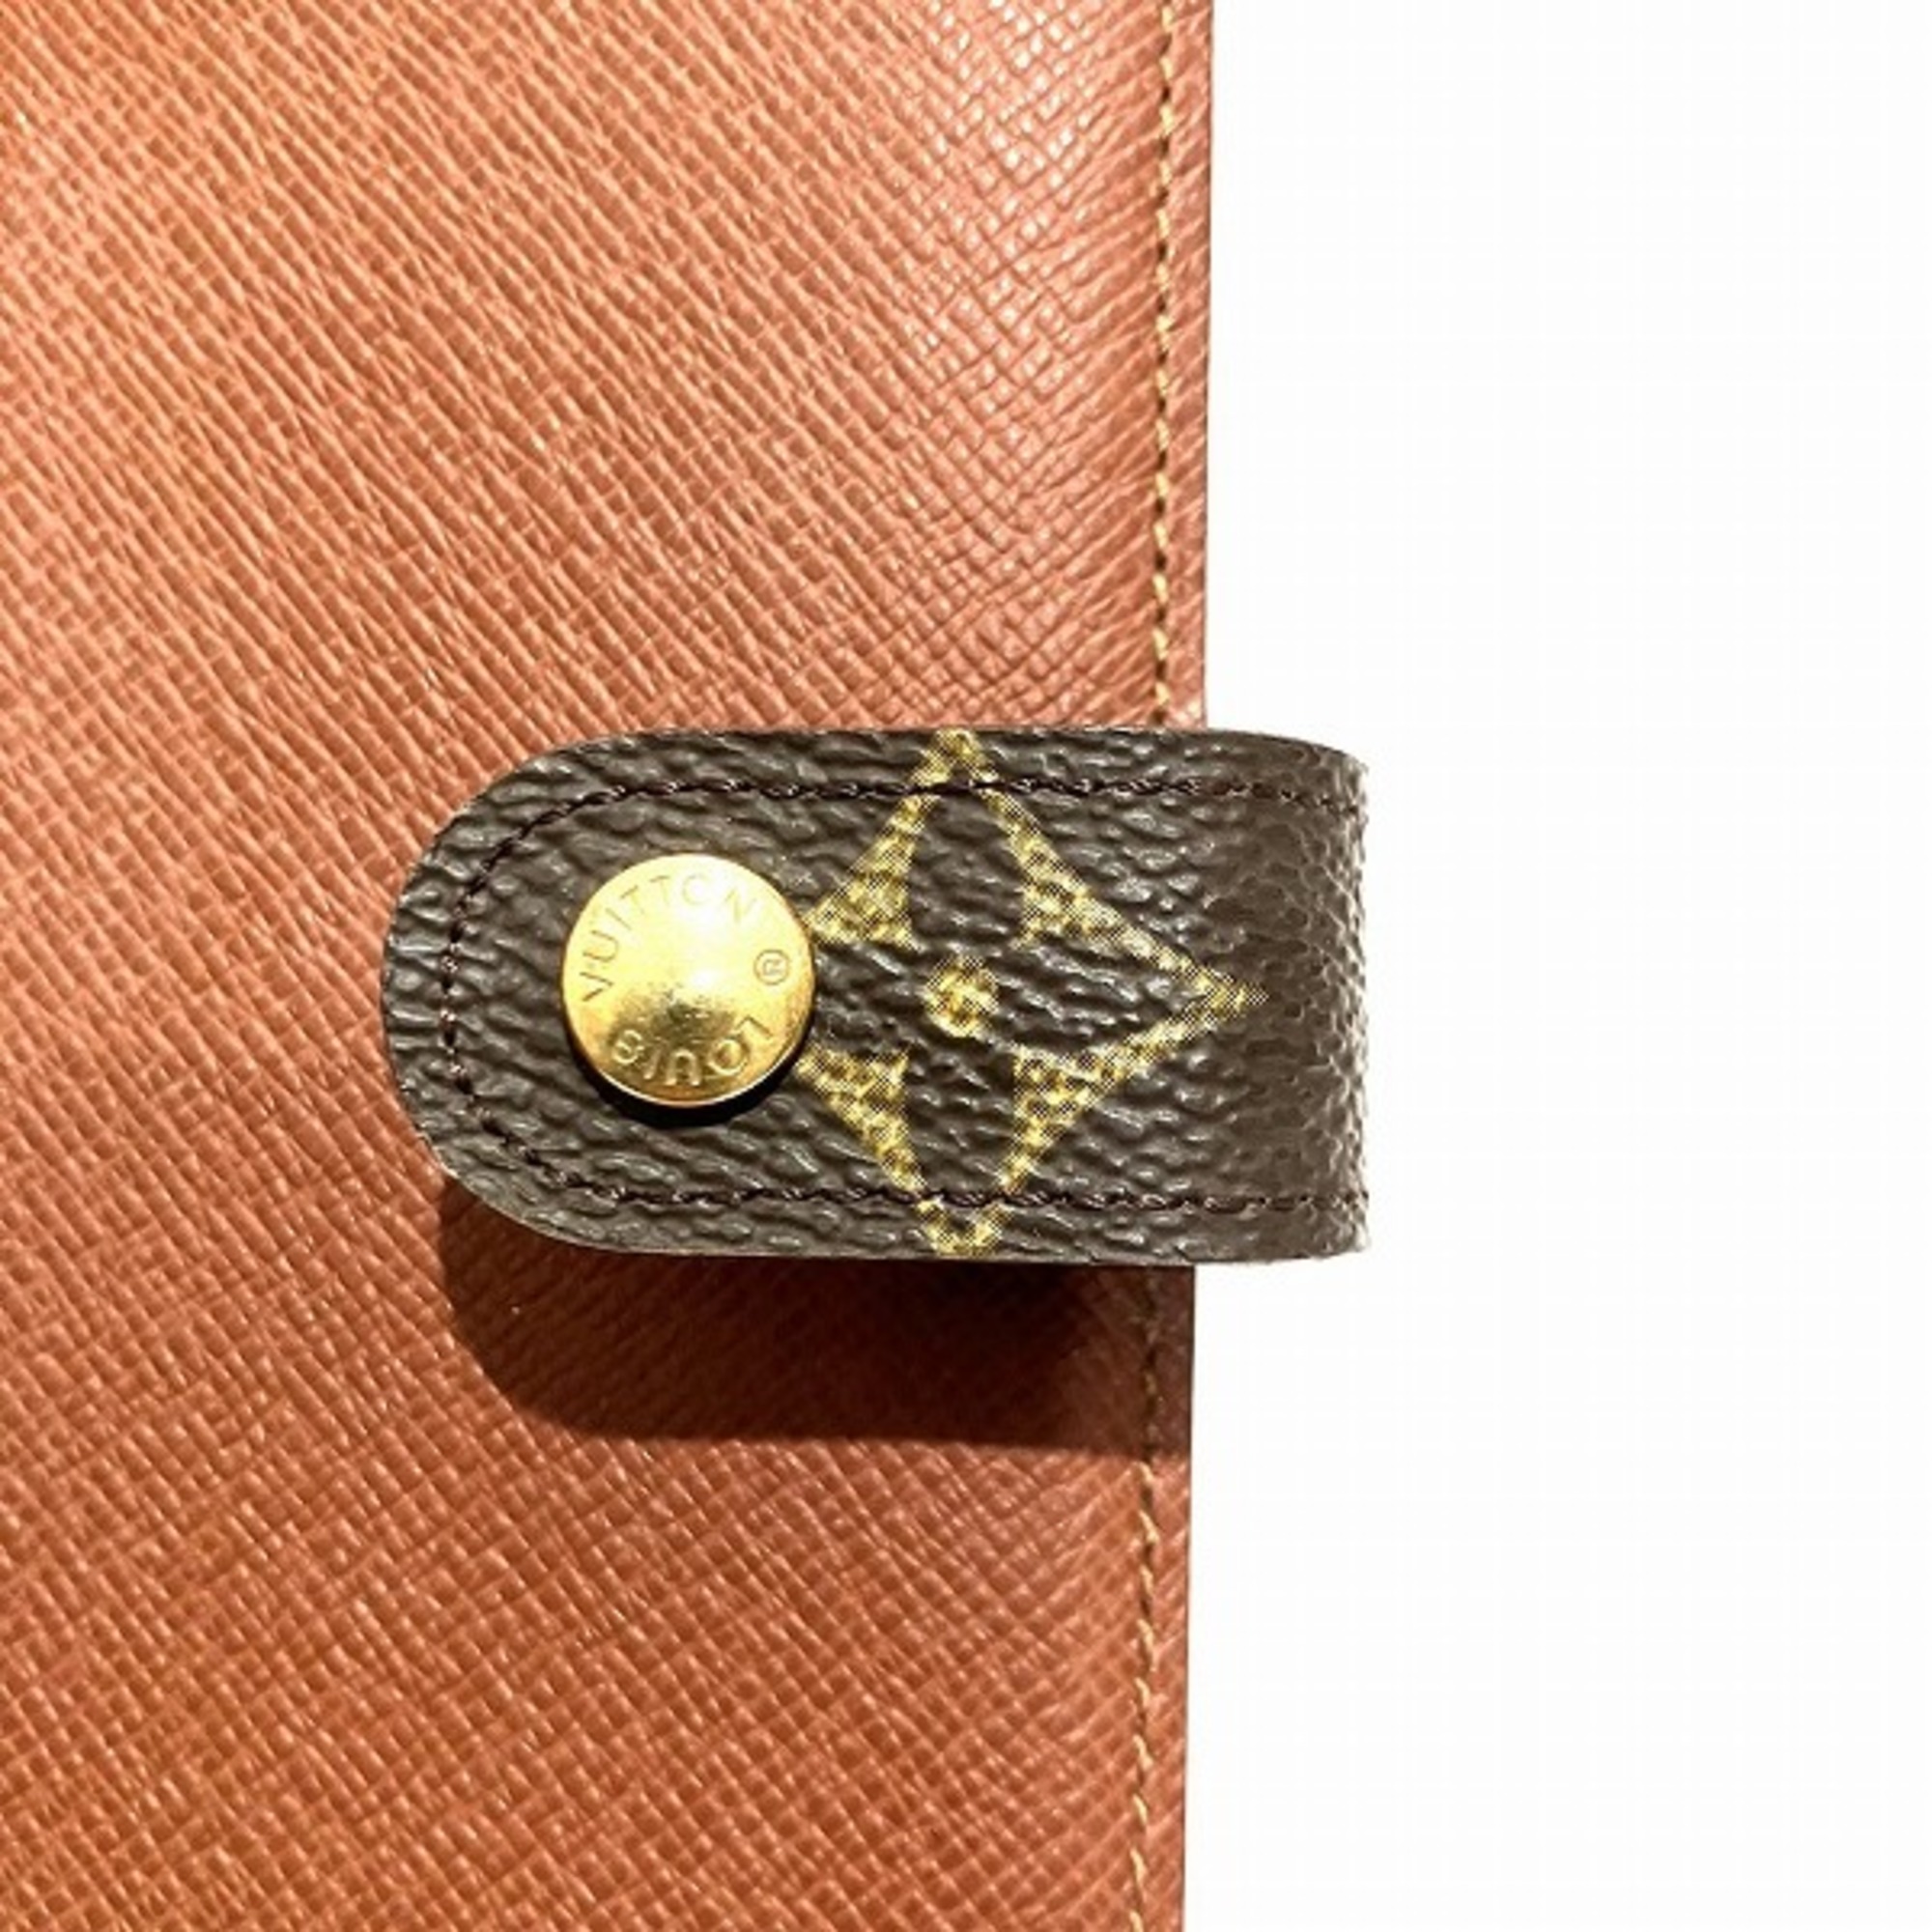 Louis Vuitton Monogram Agenda PM R20005 Small items, notebook covers, for men and women